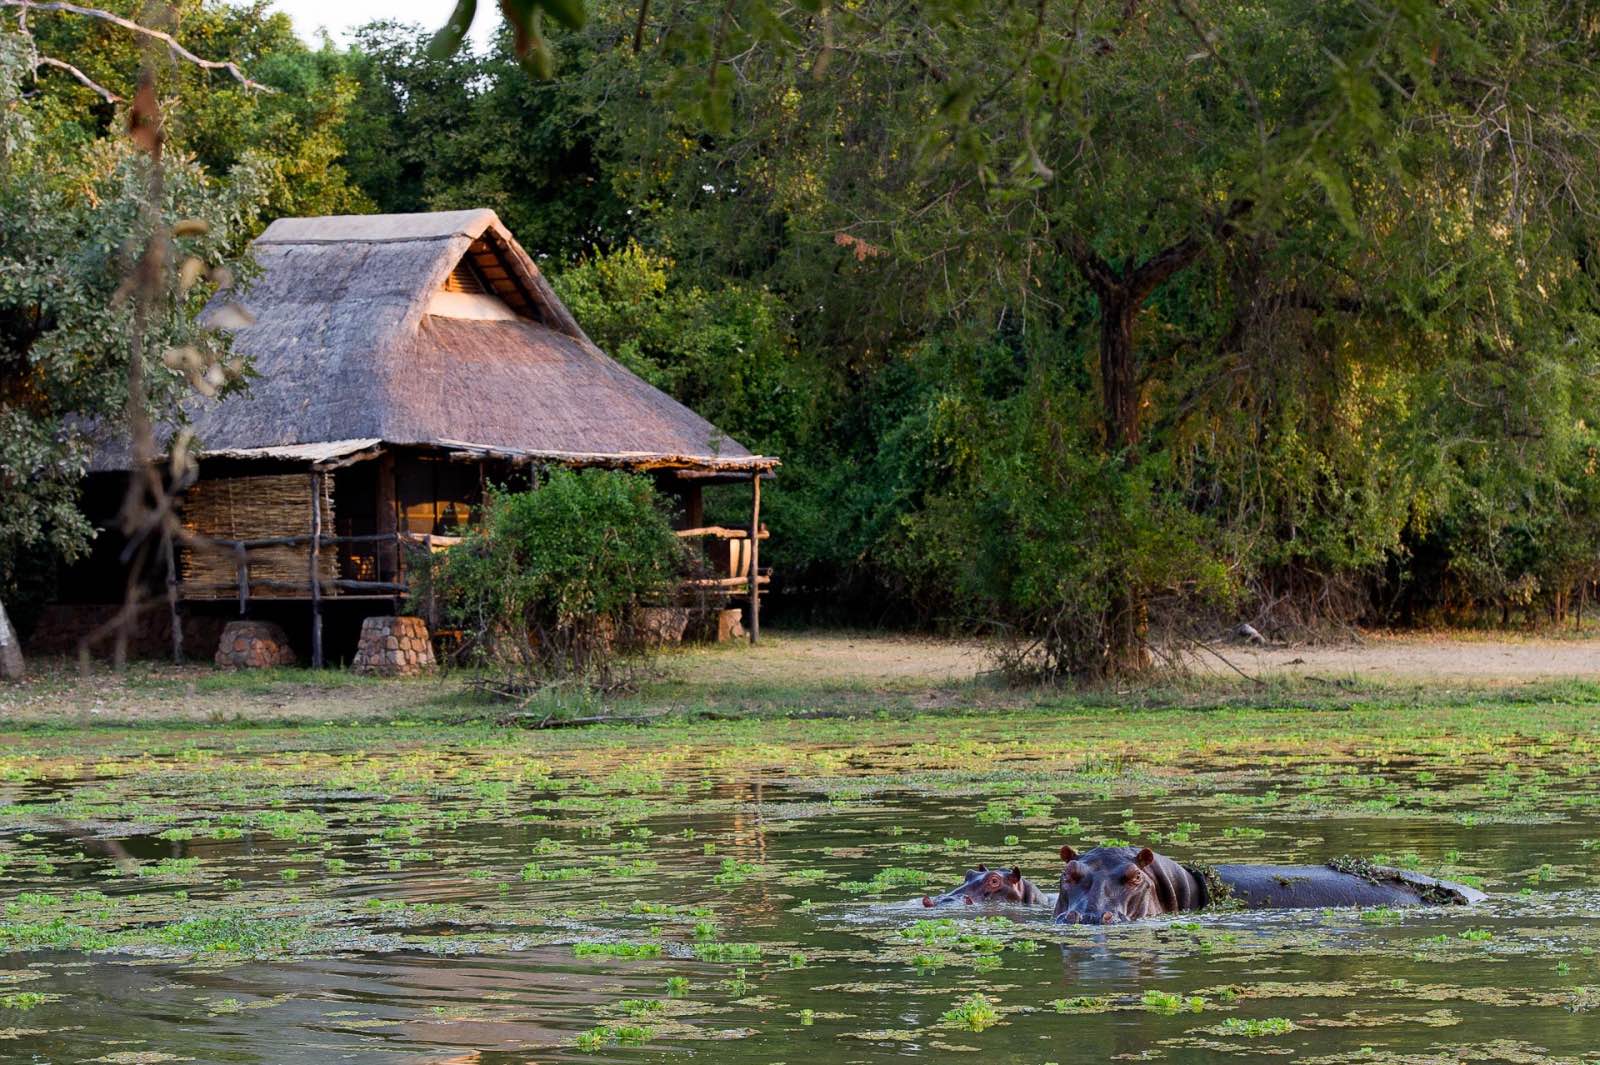 Stilted thatched chalets overlook the swamp, which is frequently visited by wildlife and birds